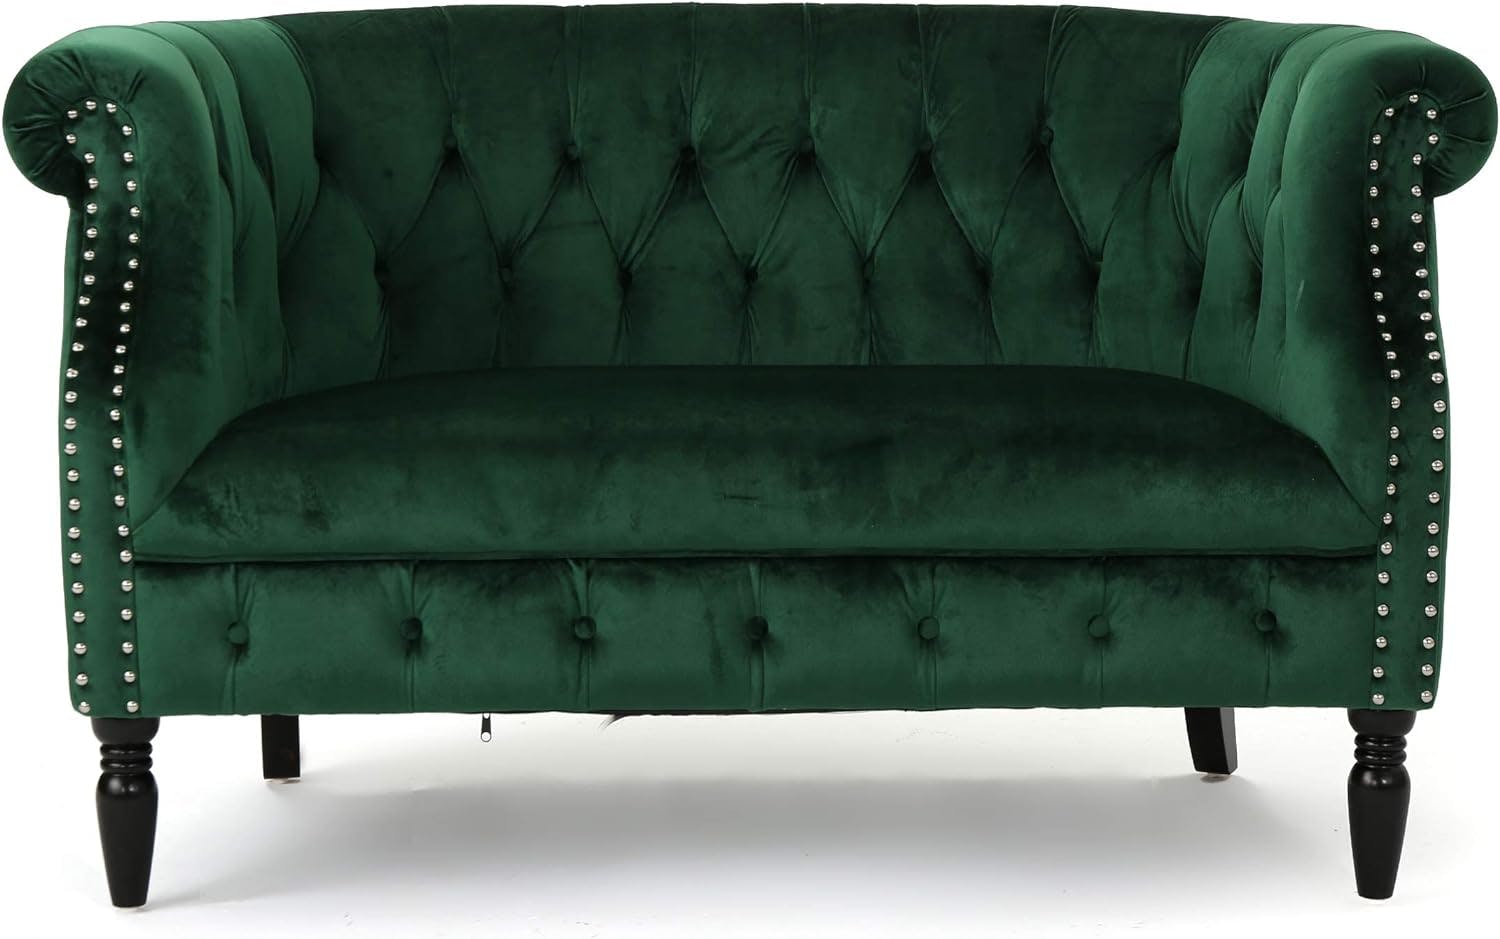 Emerald Velvet Chesterfield Loveseat with Nailhead Accents